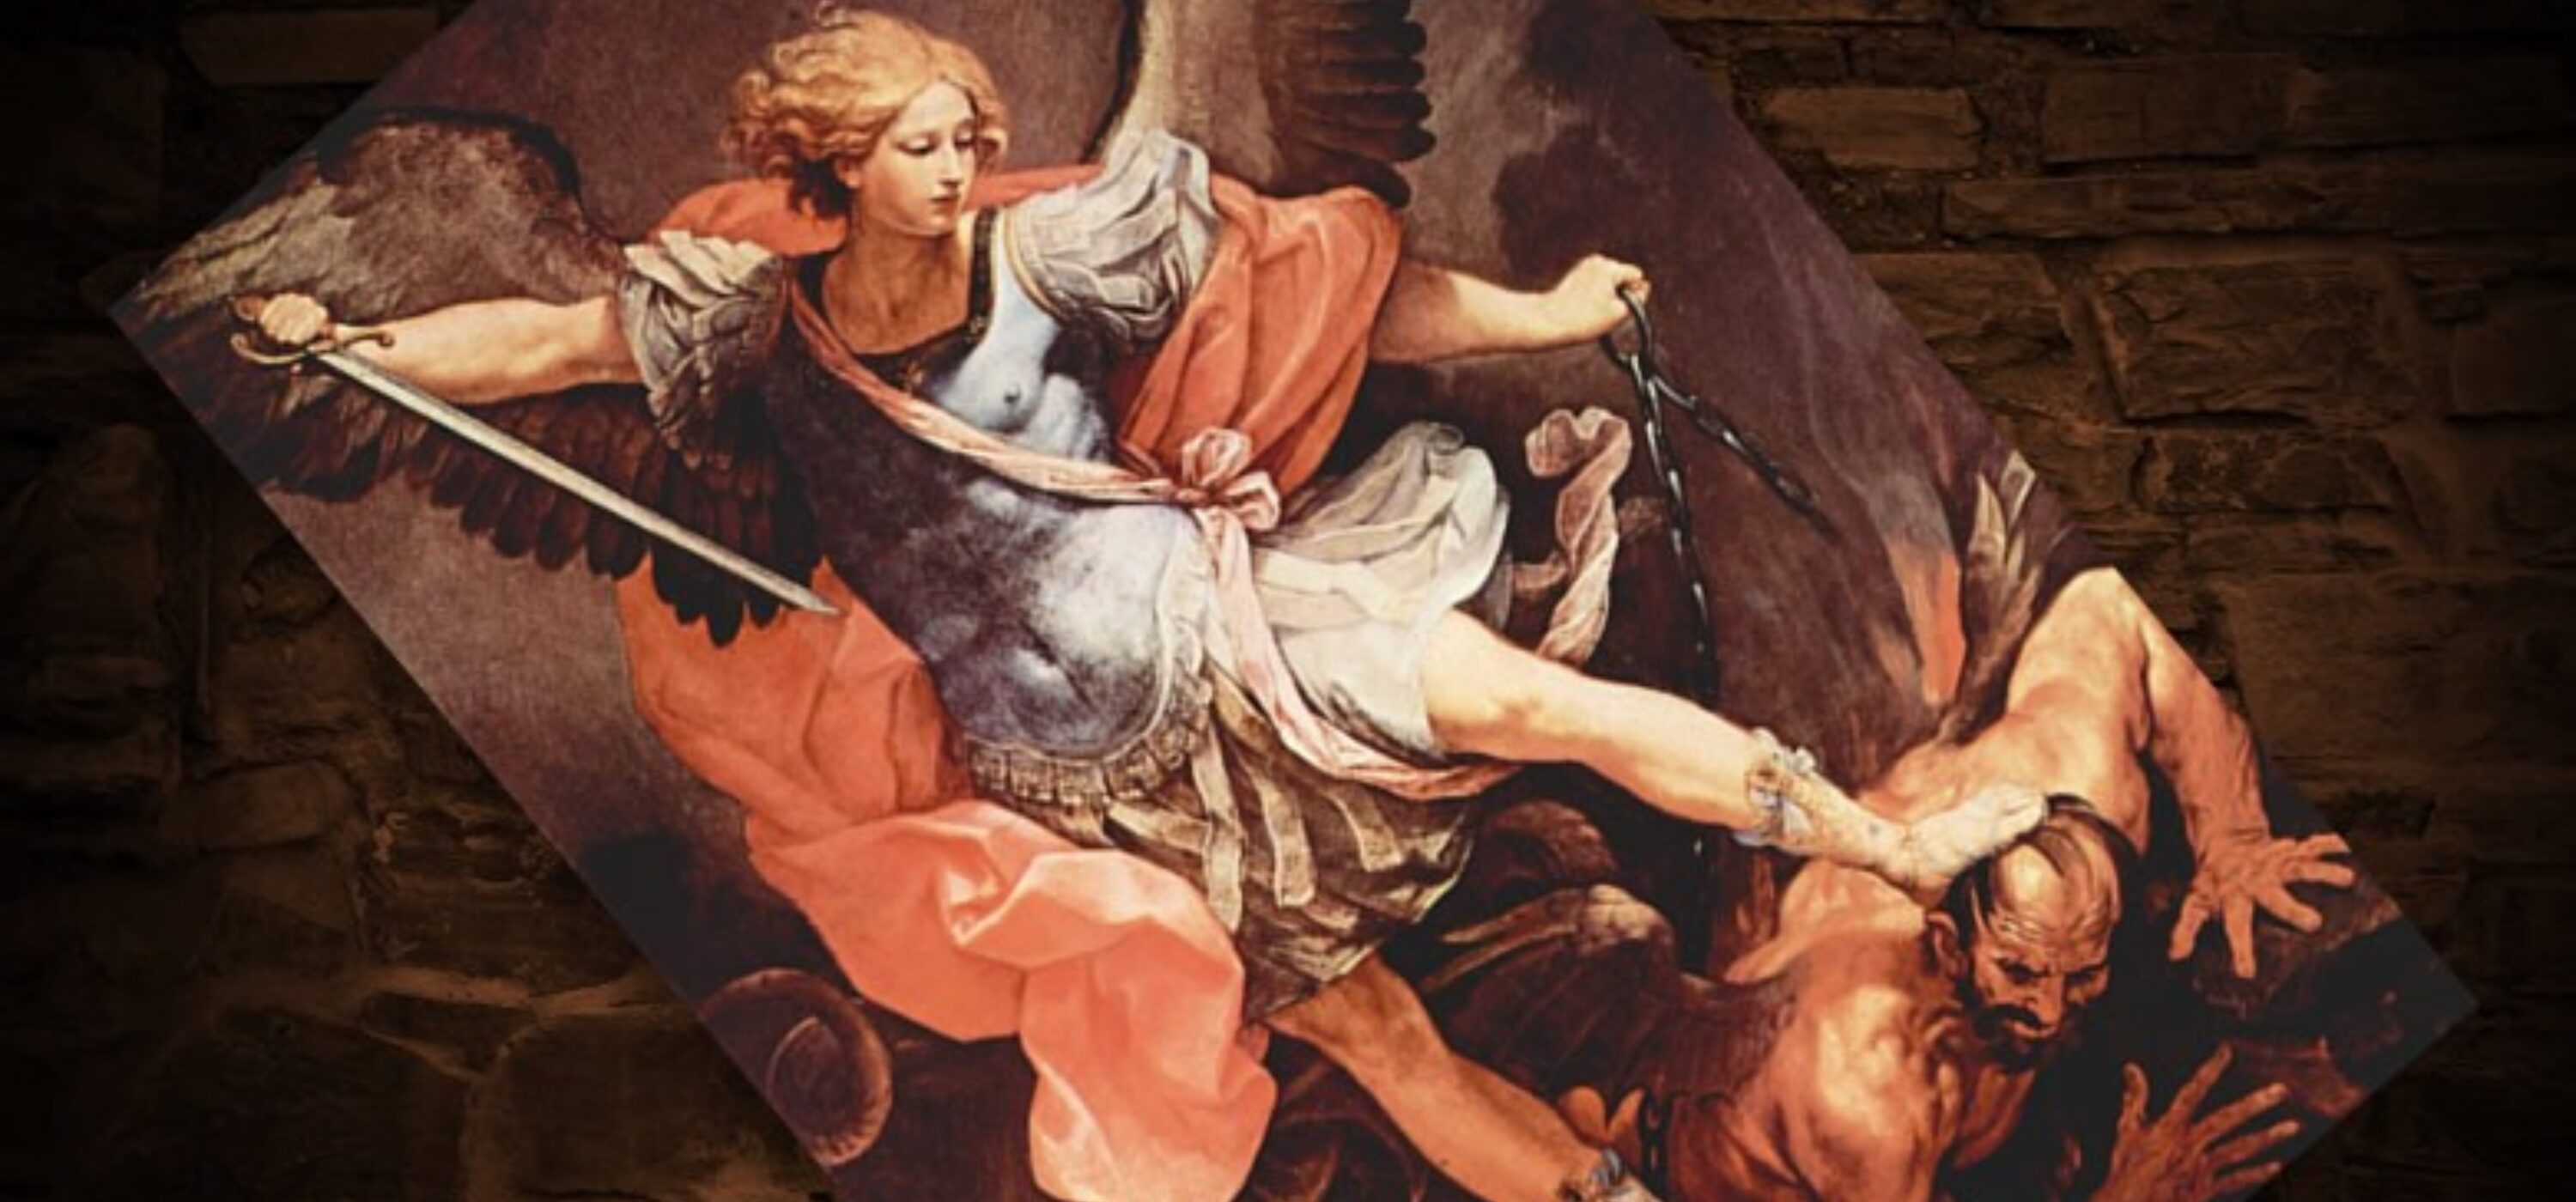 Get Ready For The Feast of St. Michael